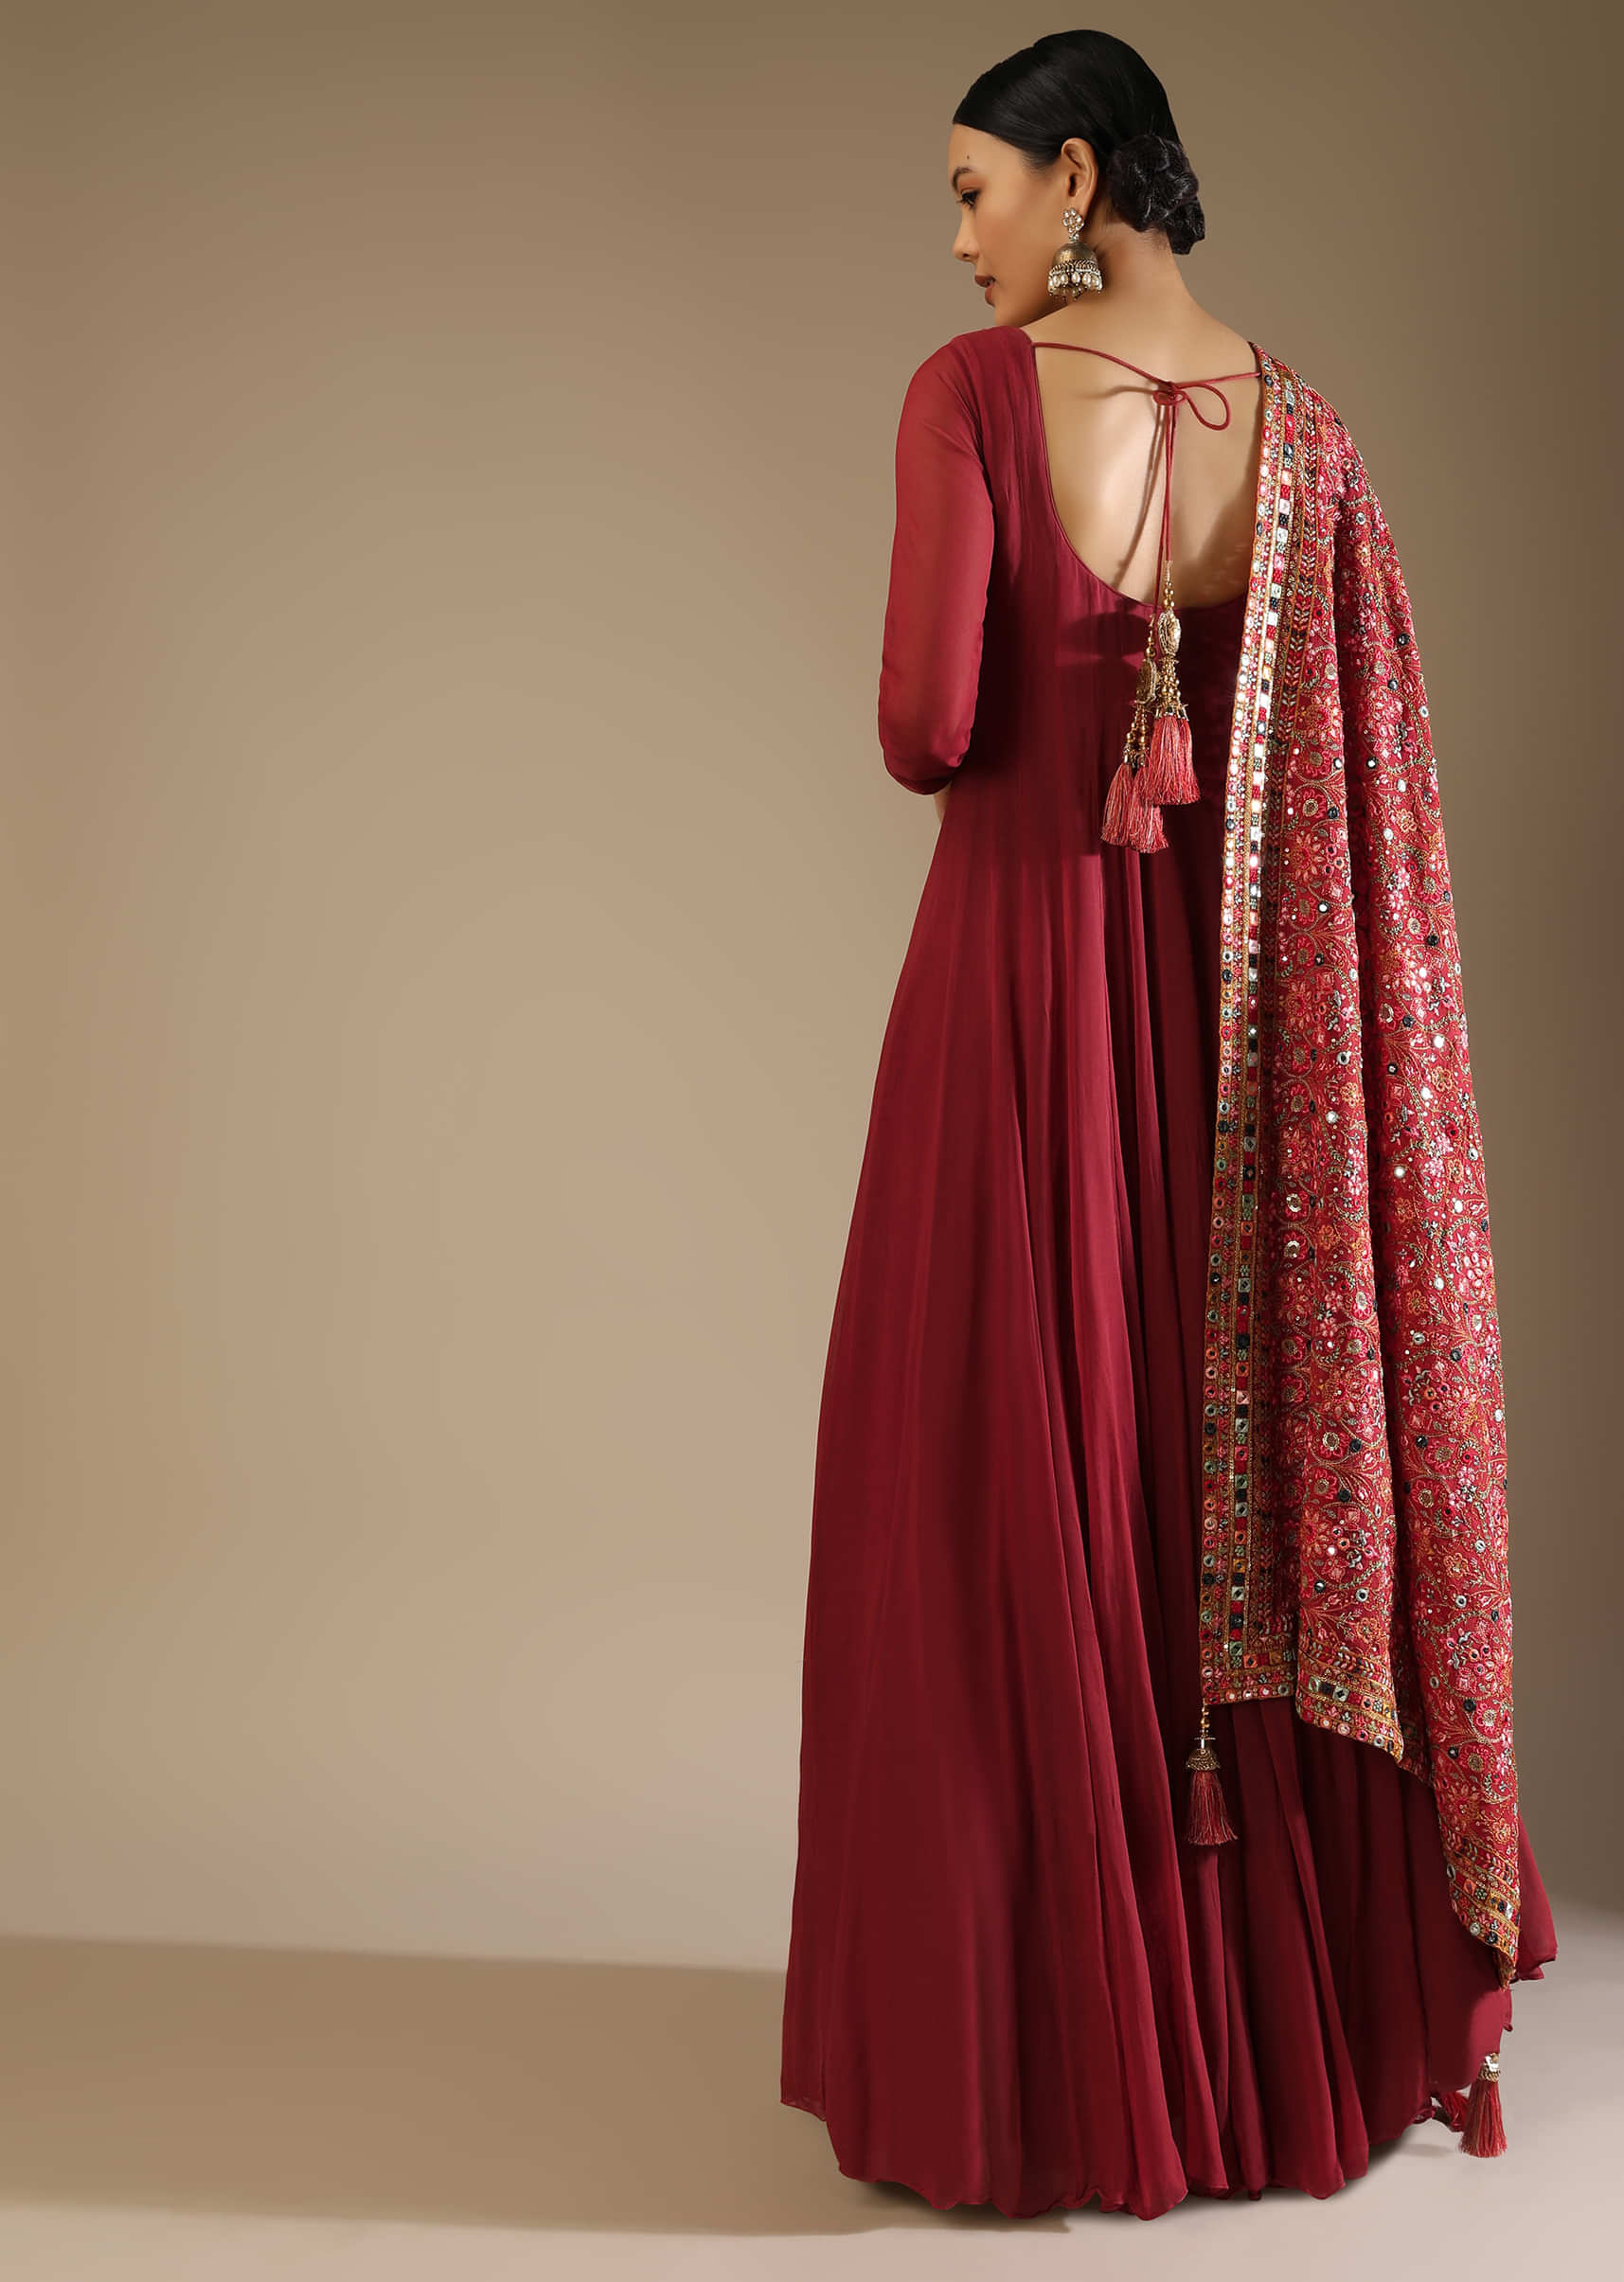 Scarlet Red Anarkali Suit In Georgette With A Multi Colored Resham And Abla Embroidered Floral Jaal On The Dupatta